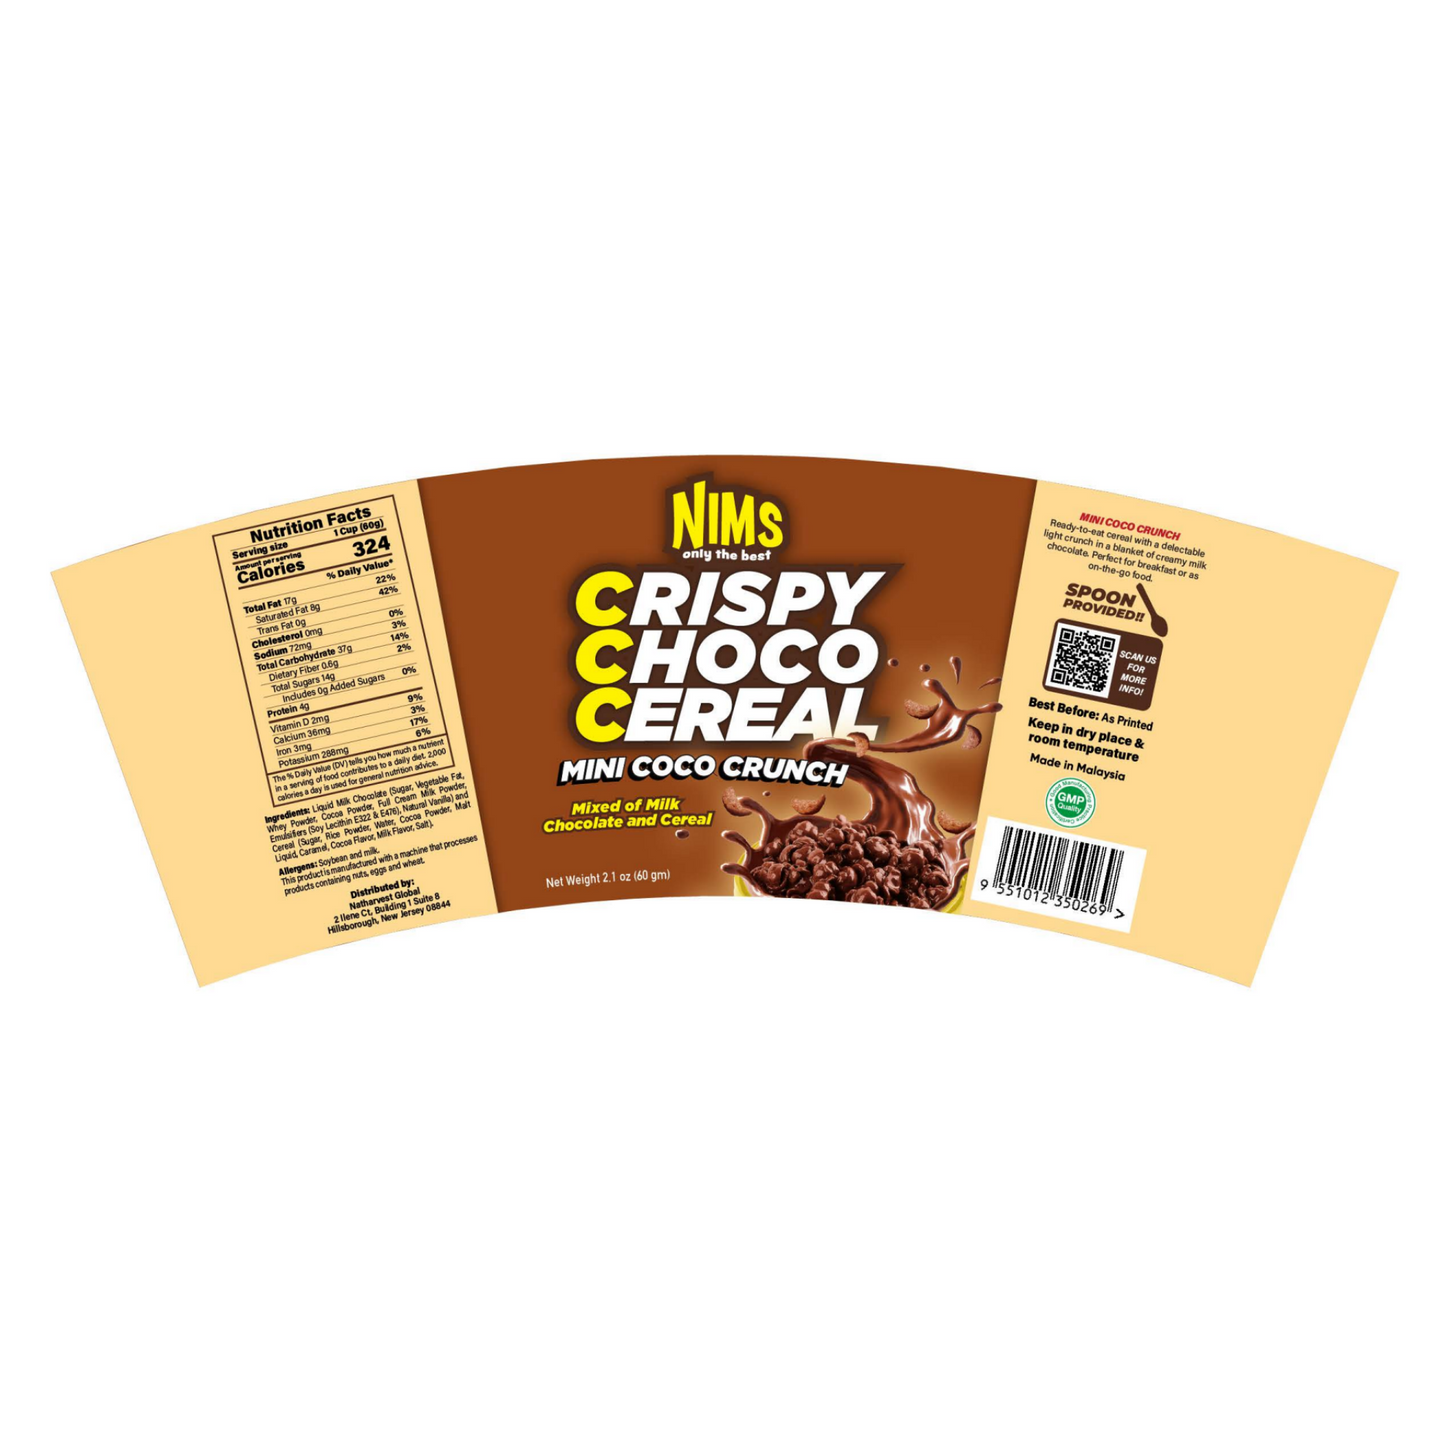 NIMS Crispy Choco Cereal, Milk Chocolate Cereal, Mixed of Milk, Chocolate and Cereal, Ready to Eat, 2.1 oz (60 gm), a pack of 12